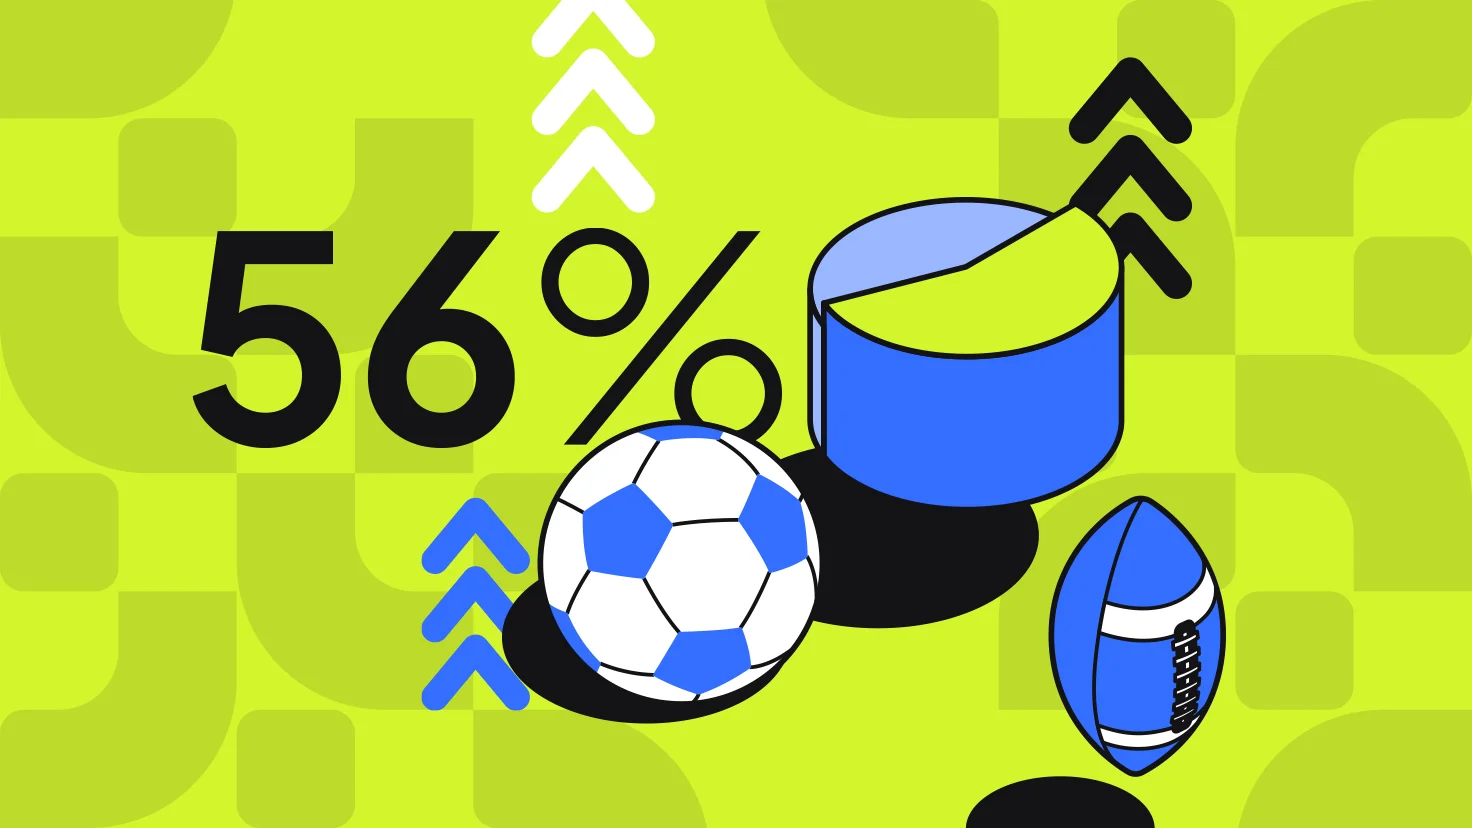 About 56% of US Sports Bettors Hold Crypto According to Survey